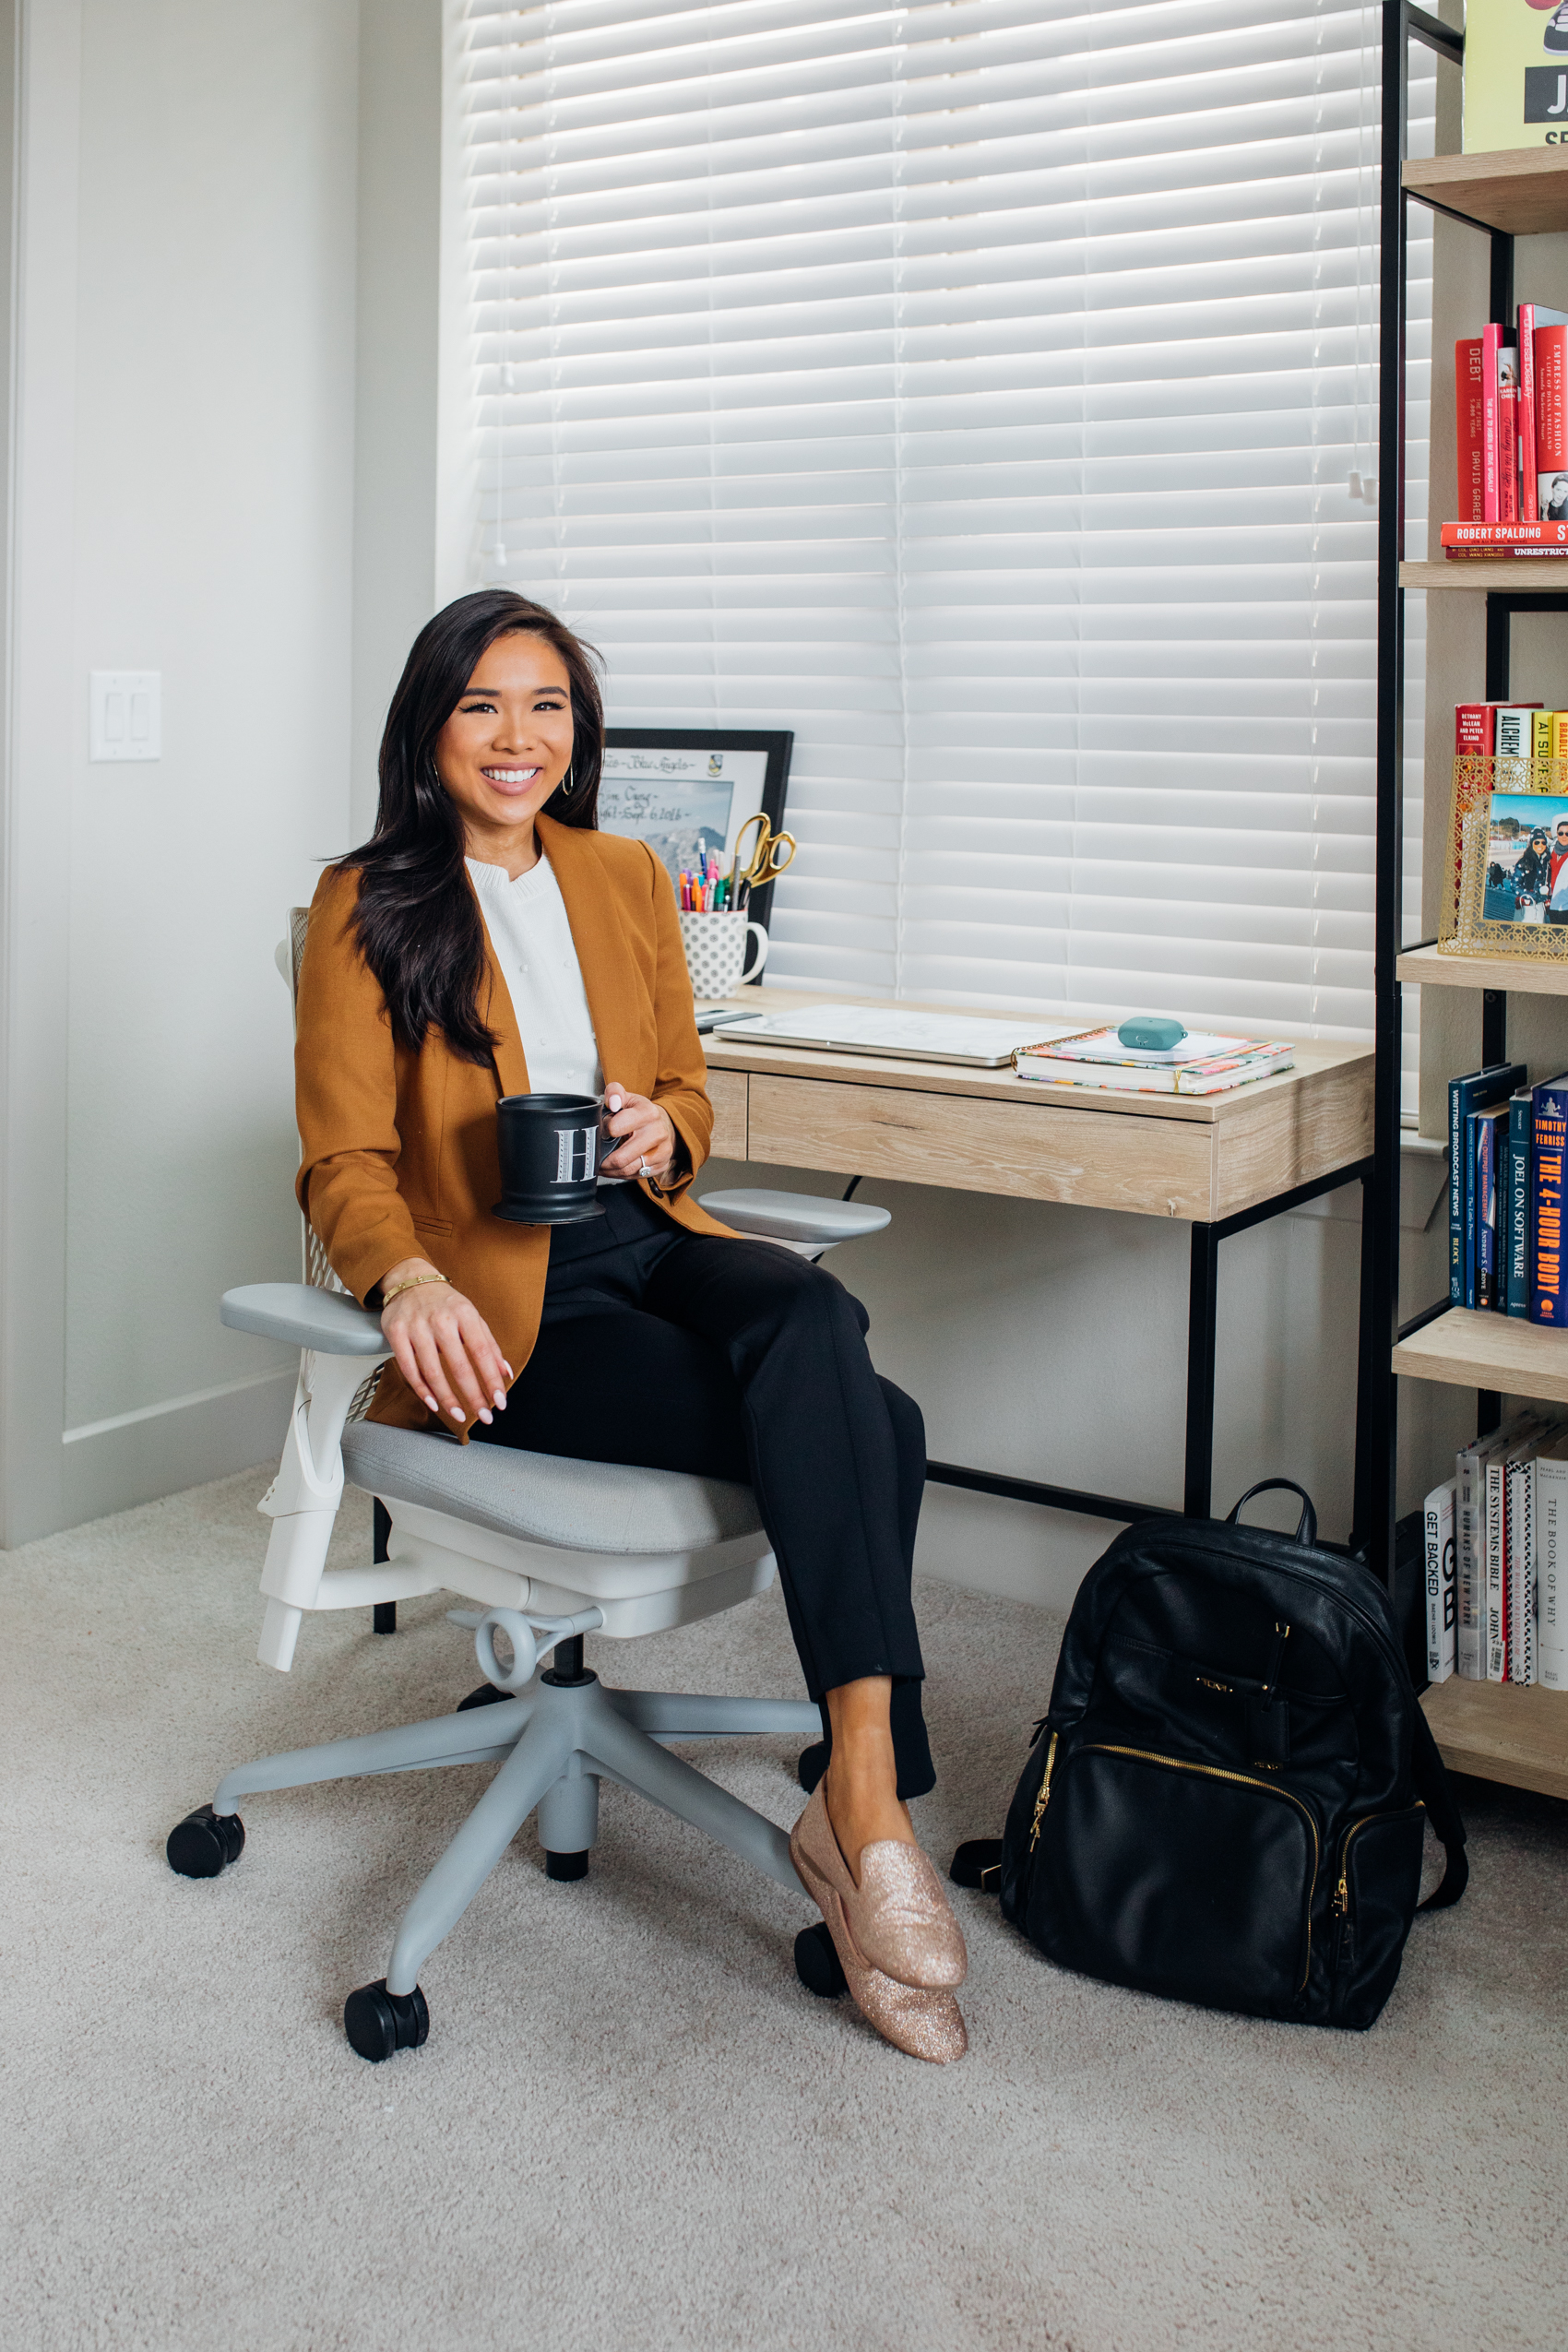 Blogger Hoang-Kim in her home office with a writing desk, Herman Miller Sayl Chair in white, Tumi leather backpack, wearing J.Crew Parke Blazer, Ann Taylor Popcorn Sweater, M.M. LaFleur Scuba Pants and Birdies flats